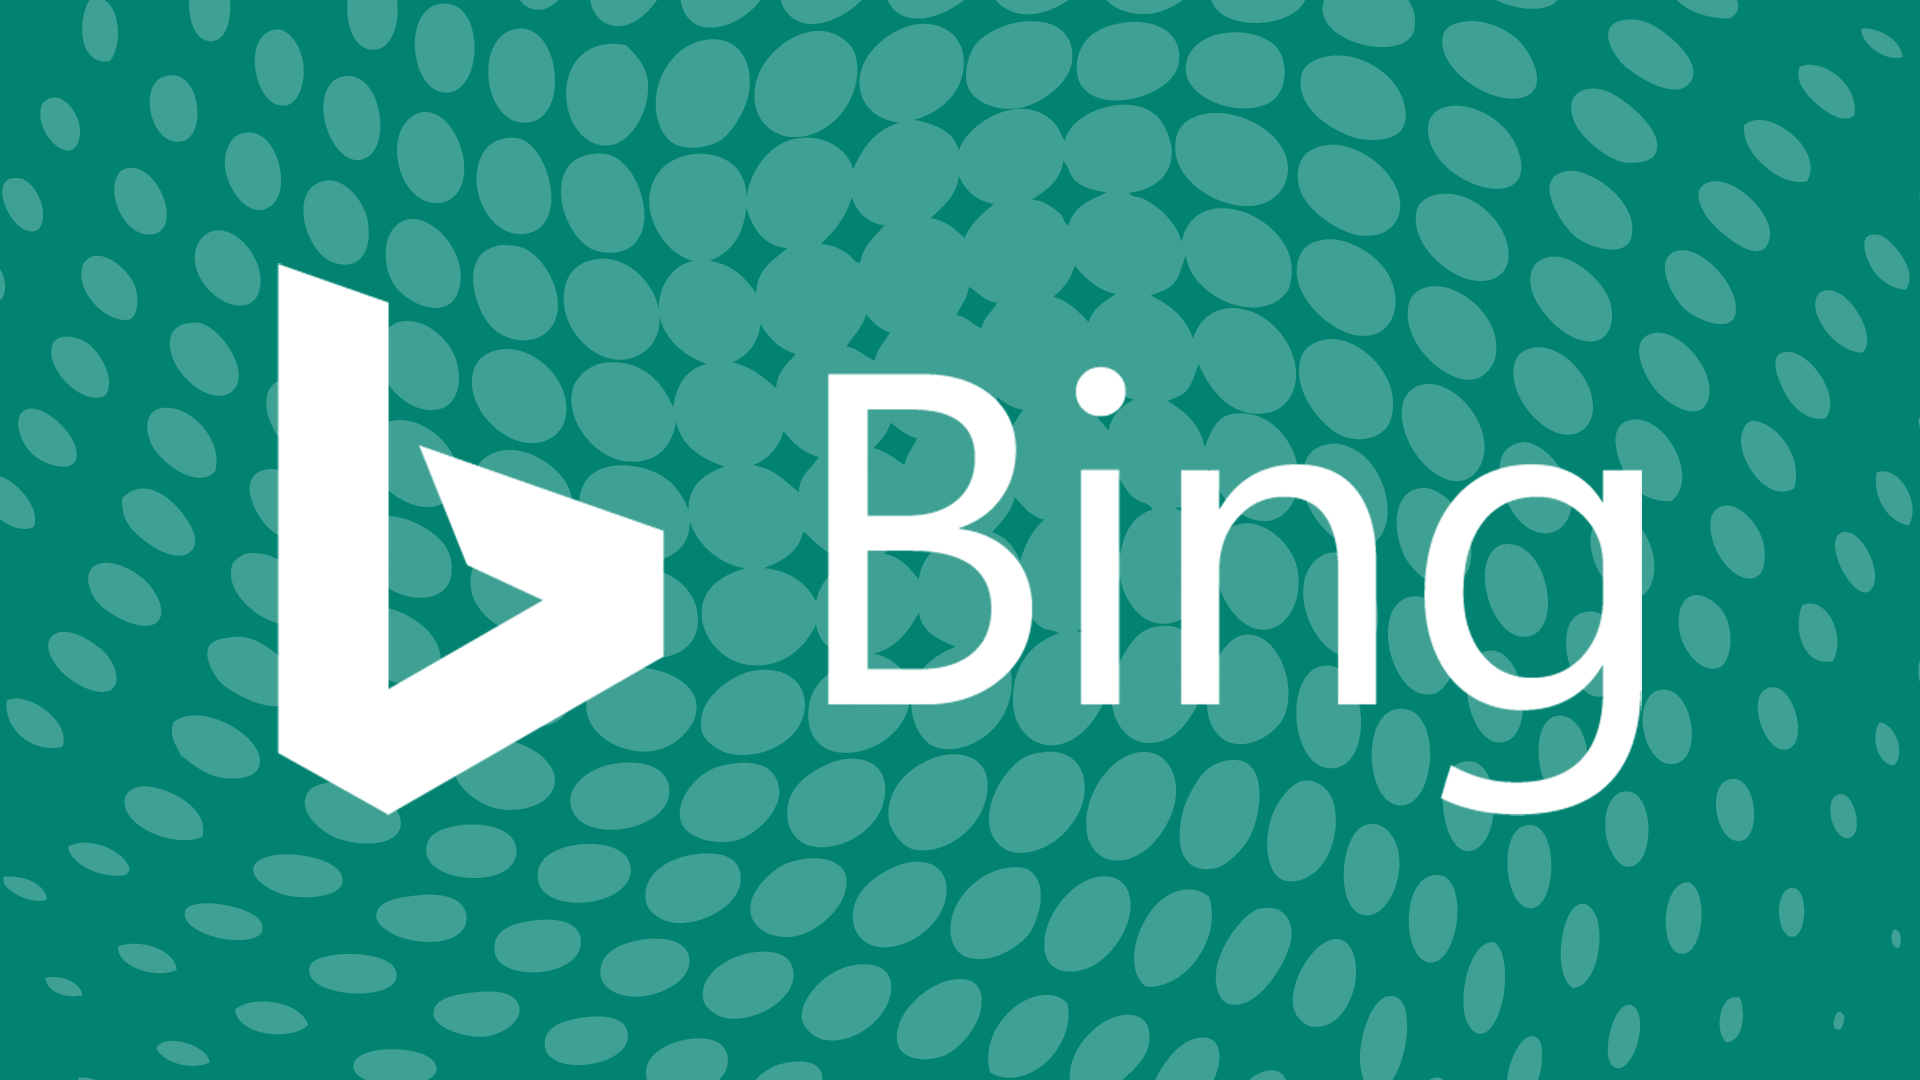 Bing Search Logo - Bing Adds Interactive Solar System To Search Results - Search Engine ...